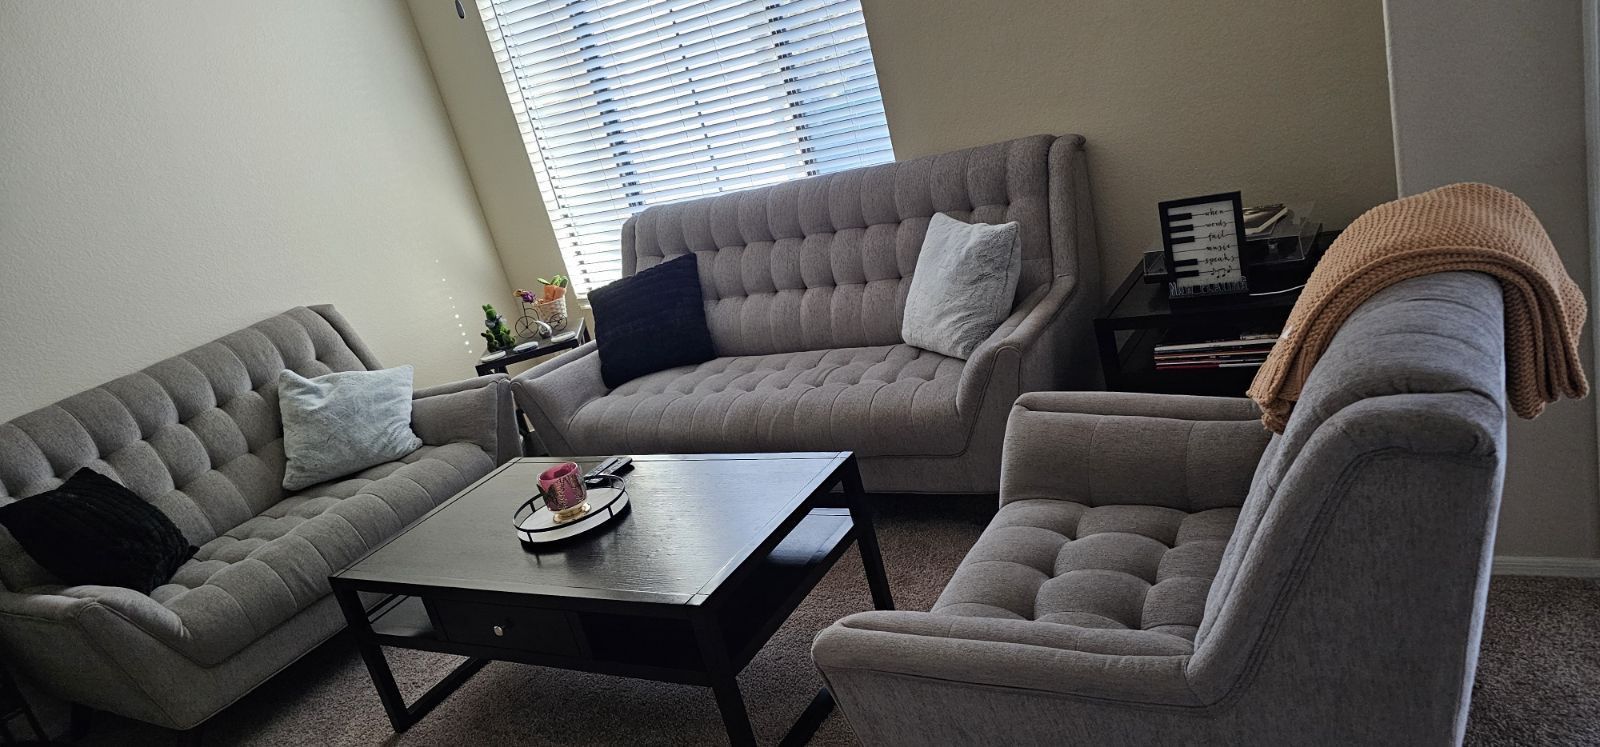 3 Piece Couch Set & end table